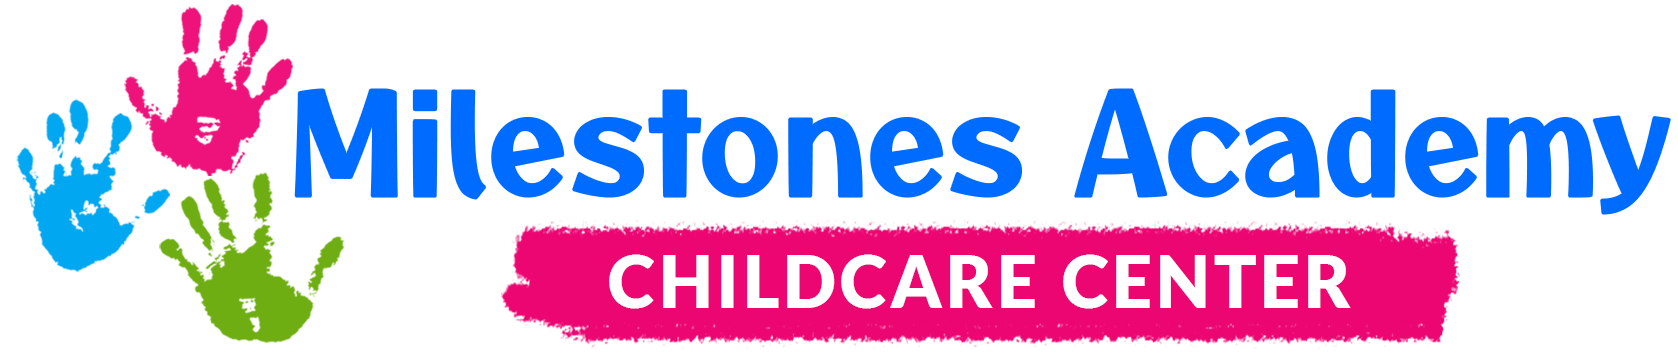 Milestones Academy Childcare Center - The Path to Successful Childhood Education - Main Logo